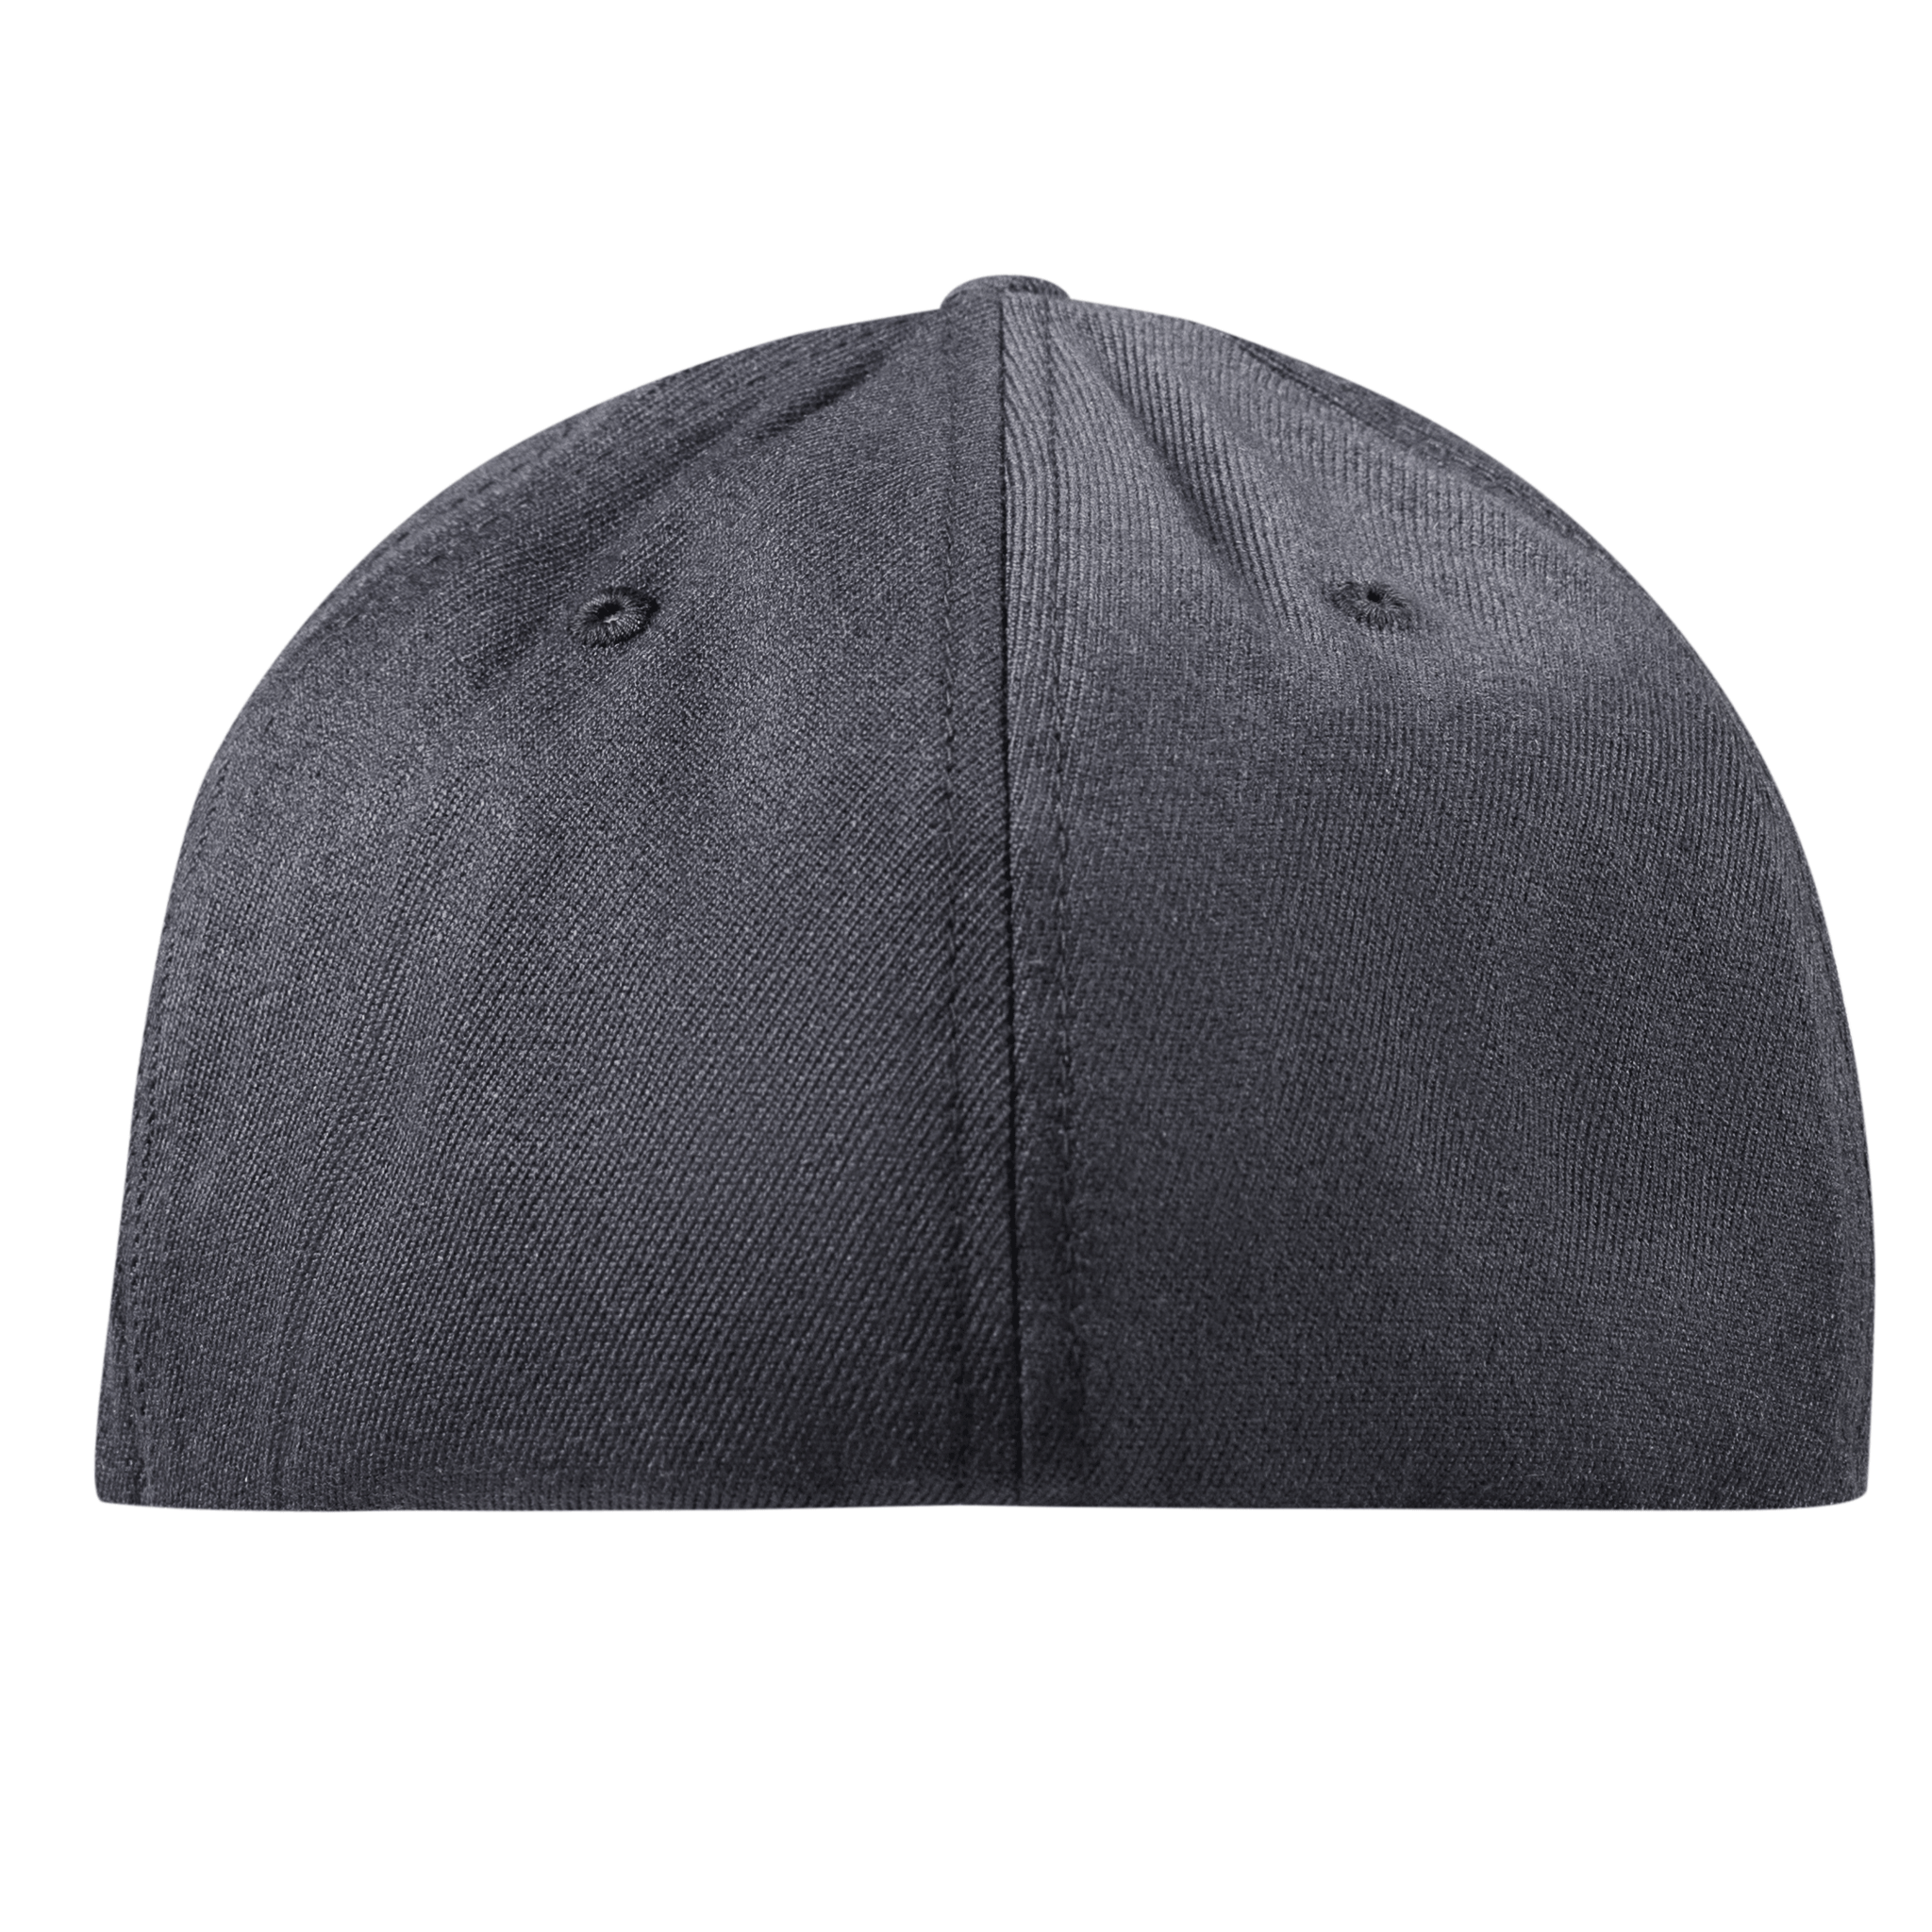 1776 Flexfit Fitted Back Charcoal